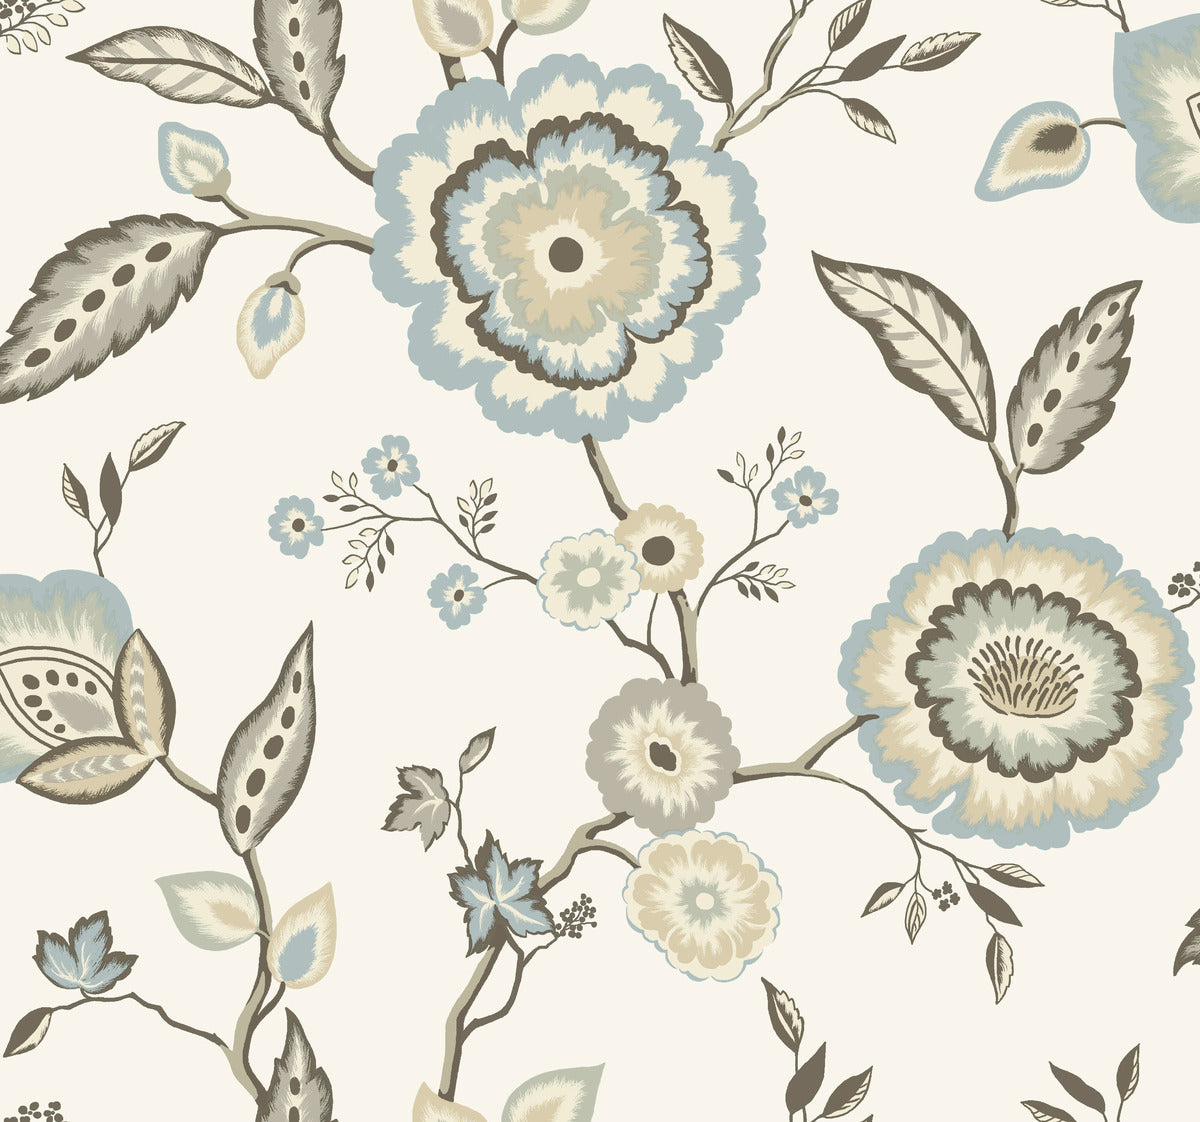 A seamless pattern featuring large blue, beige, and gray dahlia blooms with intricate detailing on their petals and leaves. The flowers and leaves are connected by delicate, winding stems, set against a light cream background. This botanical elegance offers easy installation and removal. Introducing the Dahlia Blooms Midnight/Multi Wallpaper Black, Pink (60 Sq.Ft.) by York Wallcoverings.